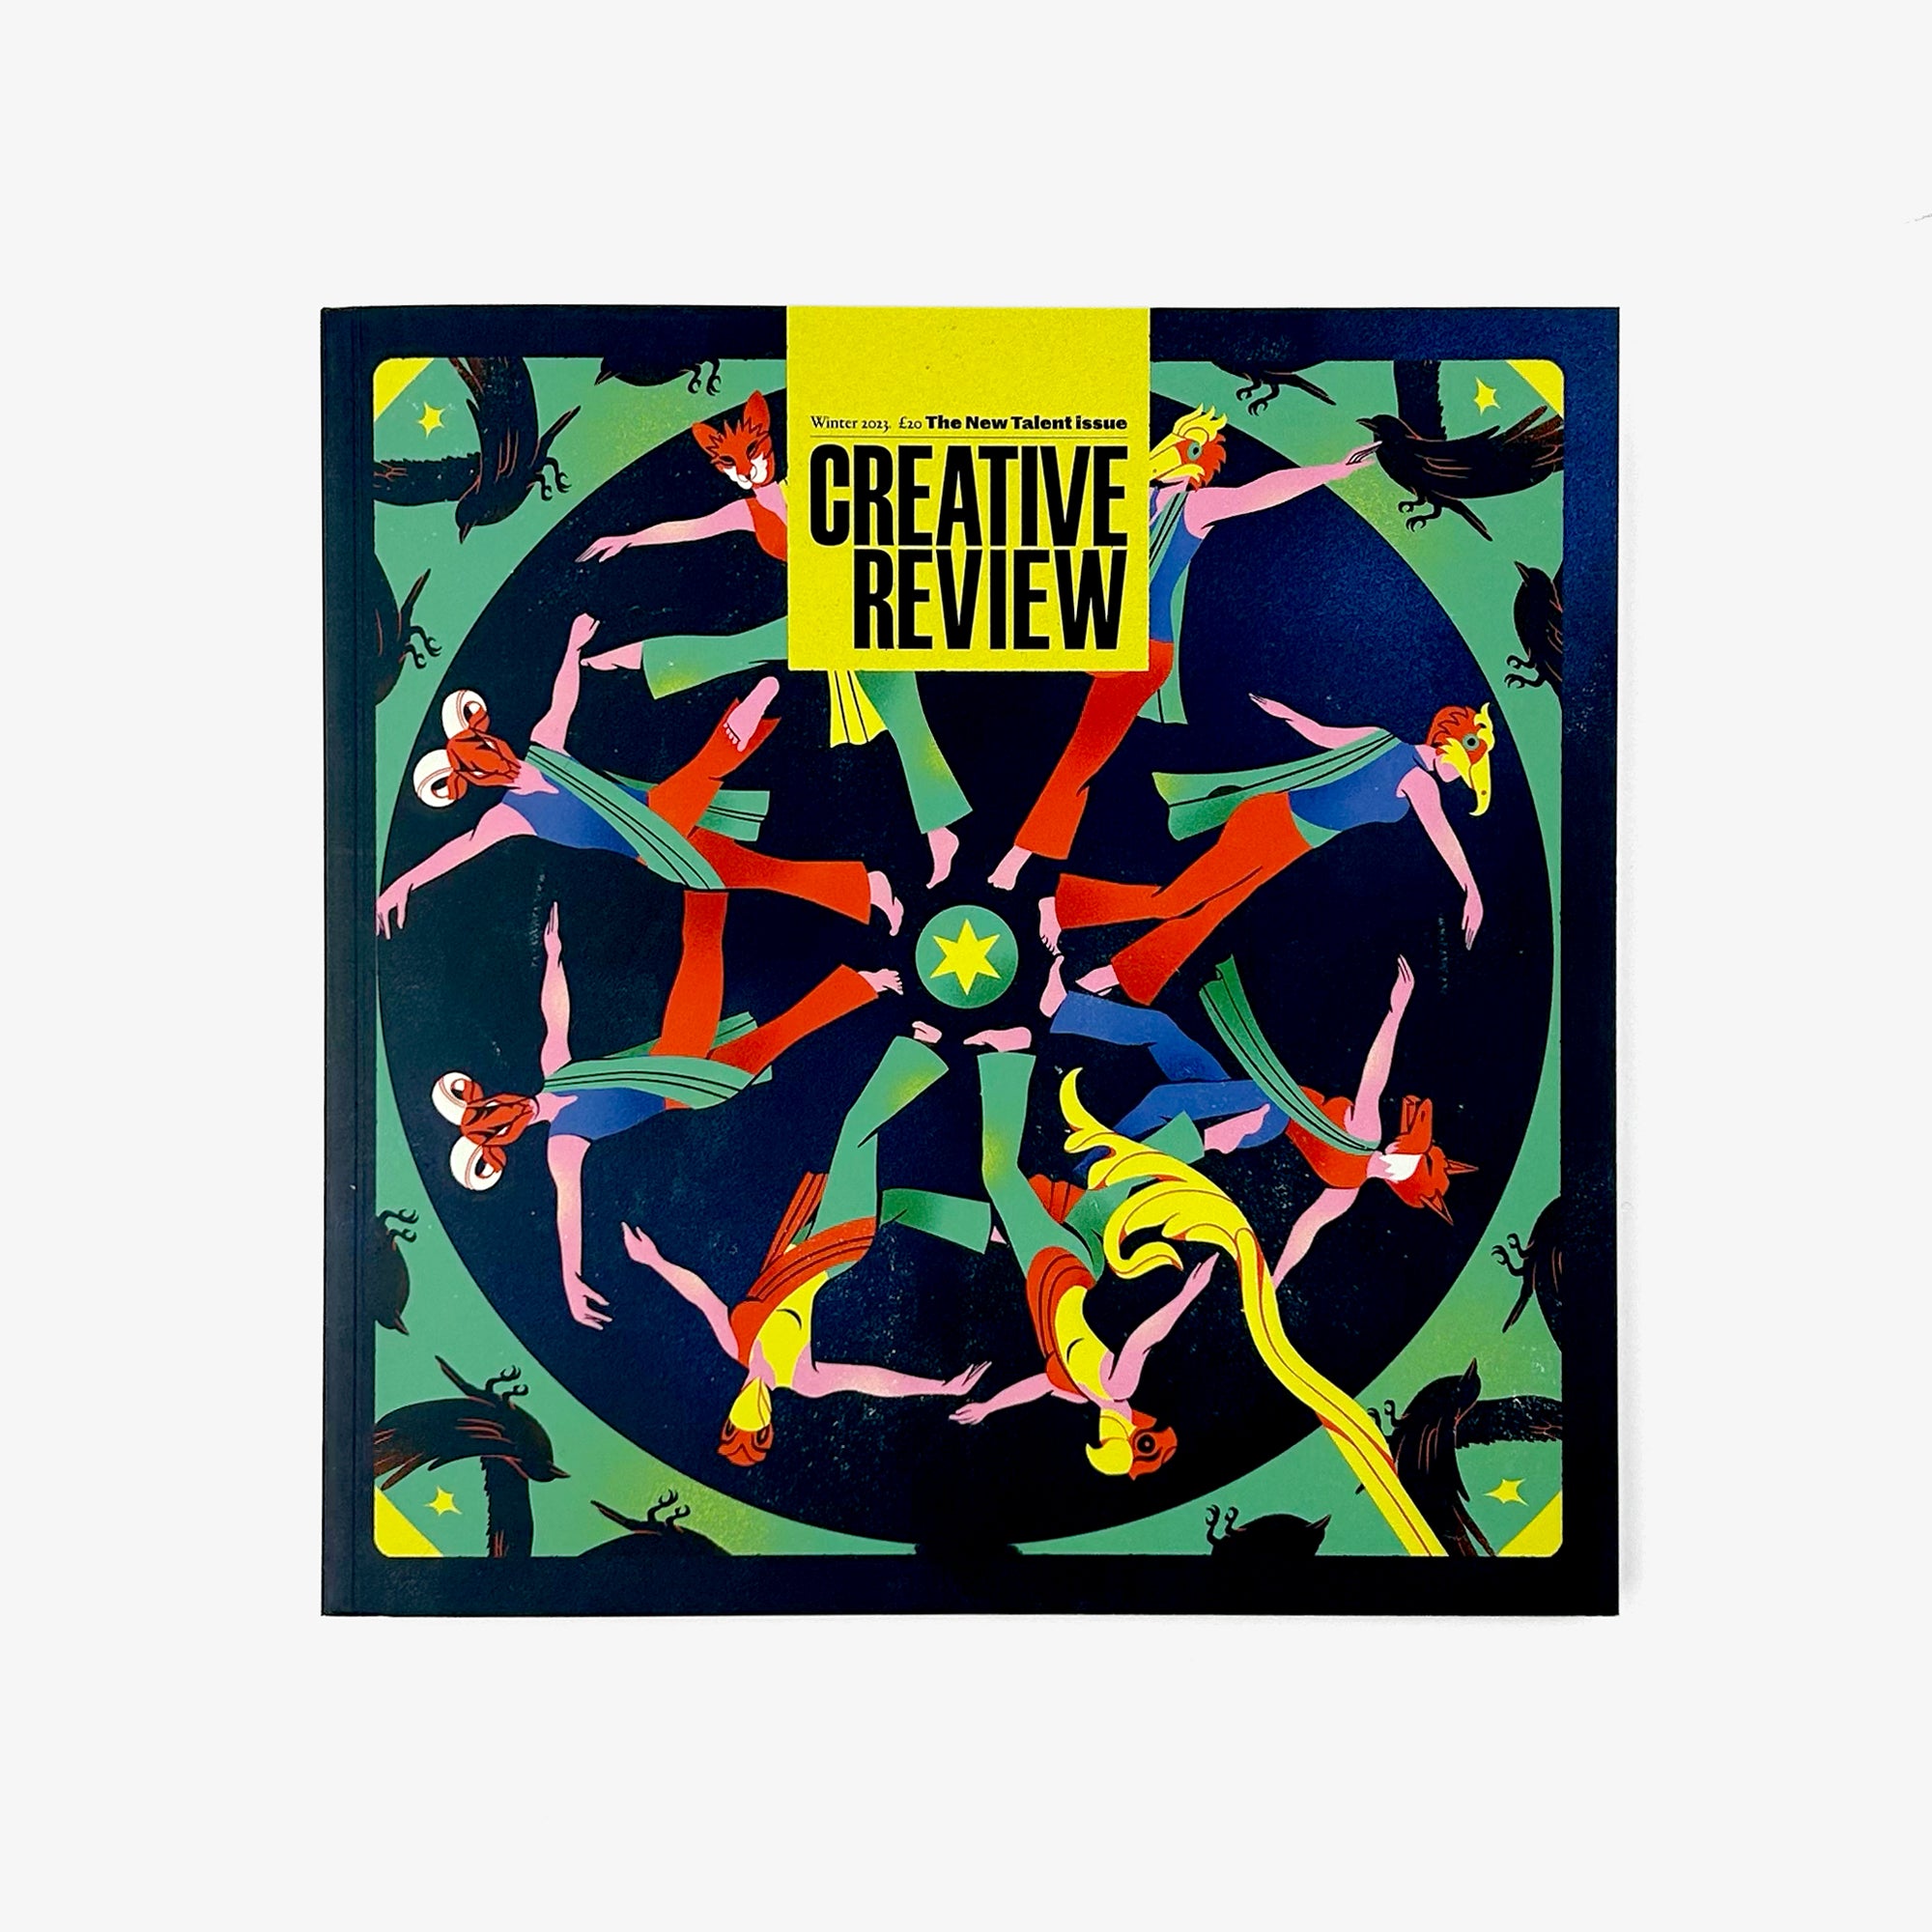 Creative Review – The New Talent Issue